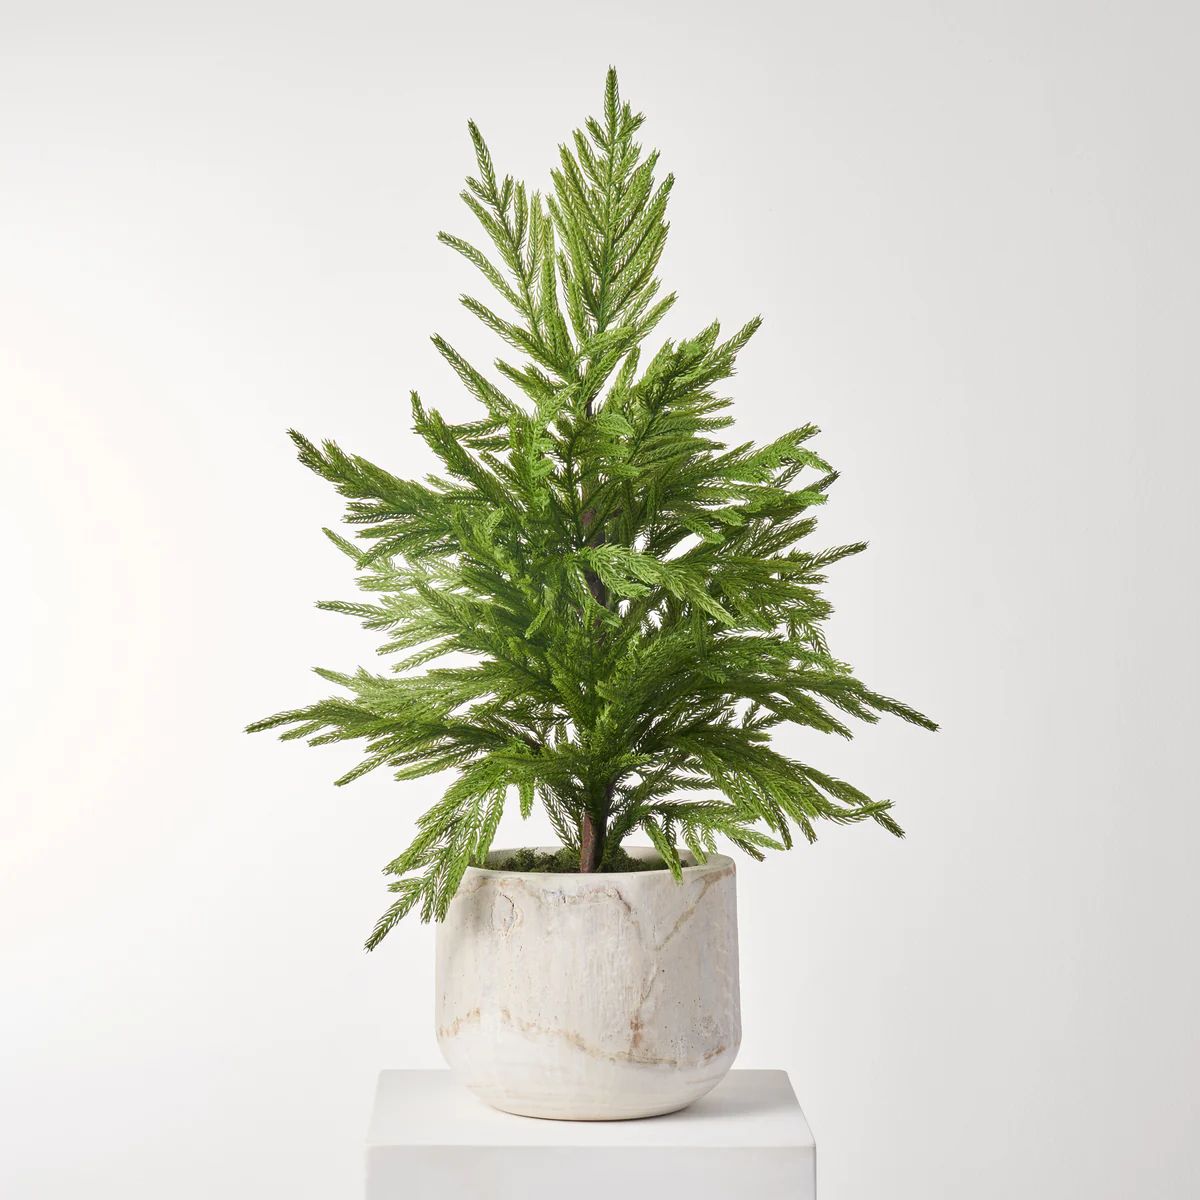 Real Touch Norfolk Pine Tree In Potted in Natural Rustic Wood Planter Bowl | Darby Creek Trading